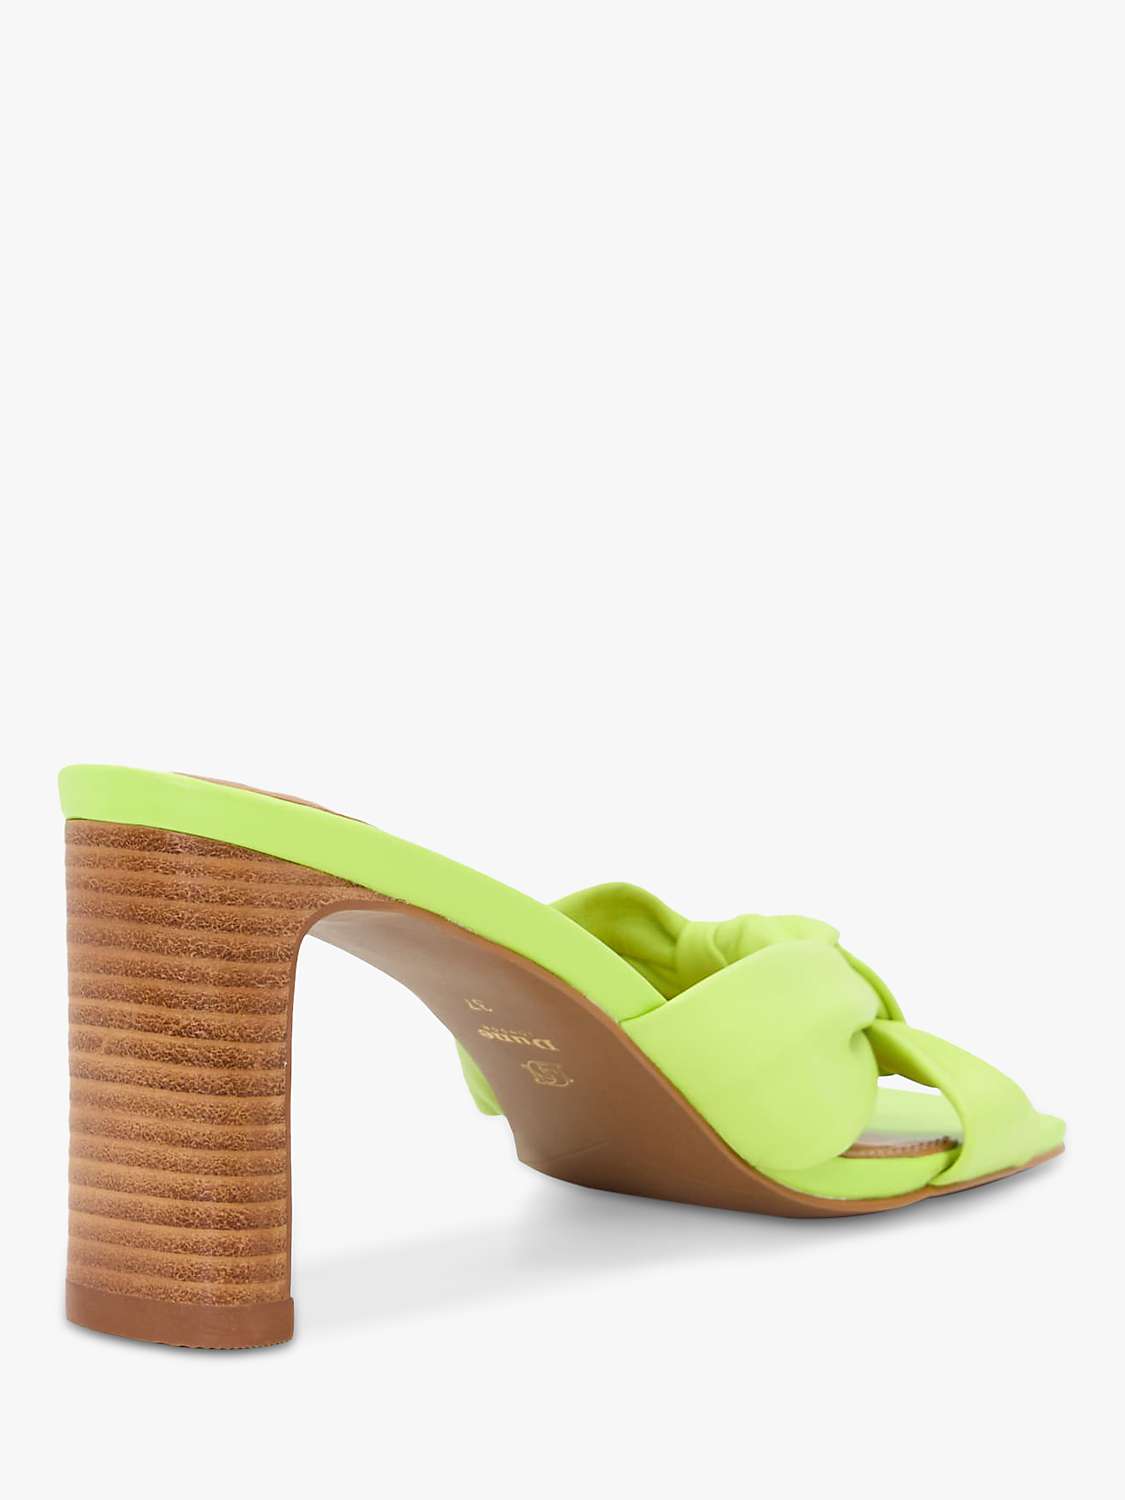 Dune Maize Leather Mules, Lime Green at John Lewis & Partners